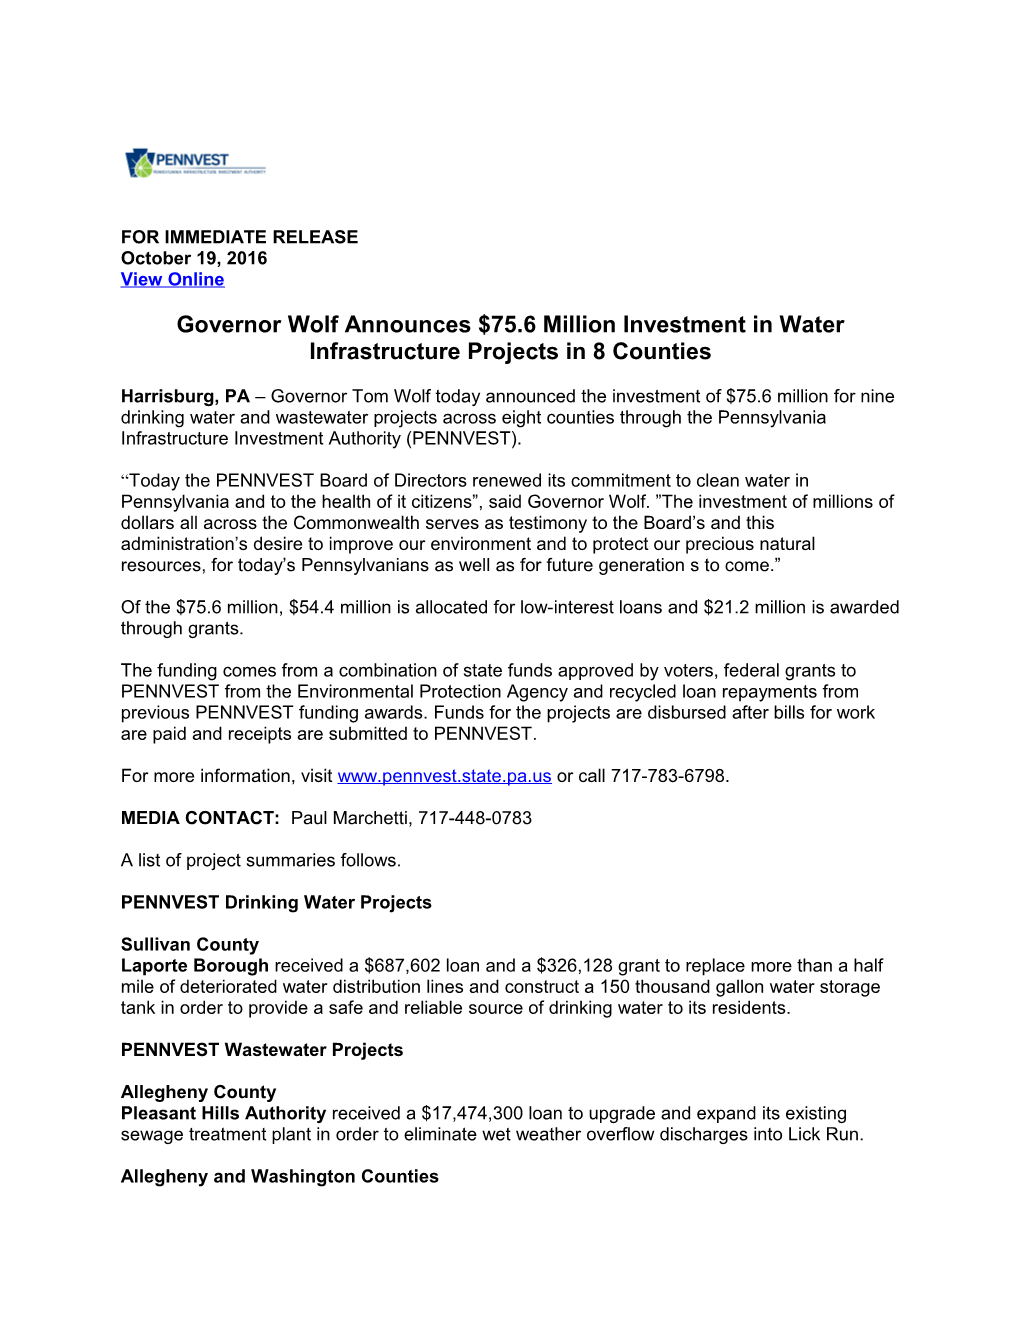 Governor Wolf Announces $75.6 Million Investment in Water Infrastructure Projects in 8 Counties